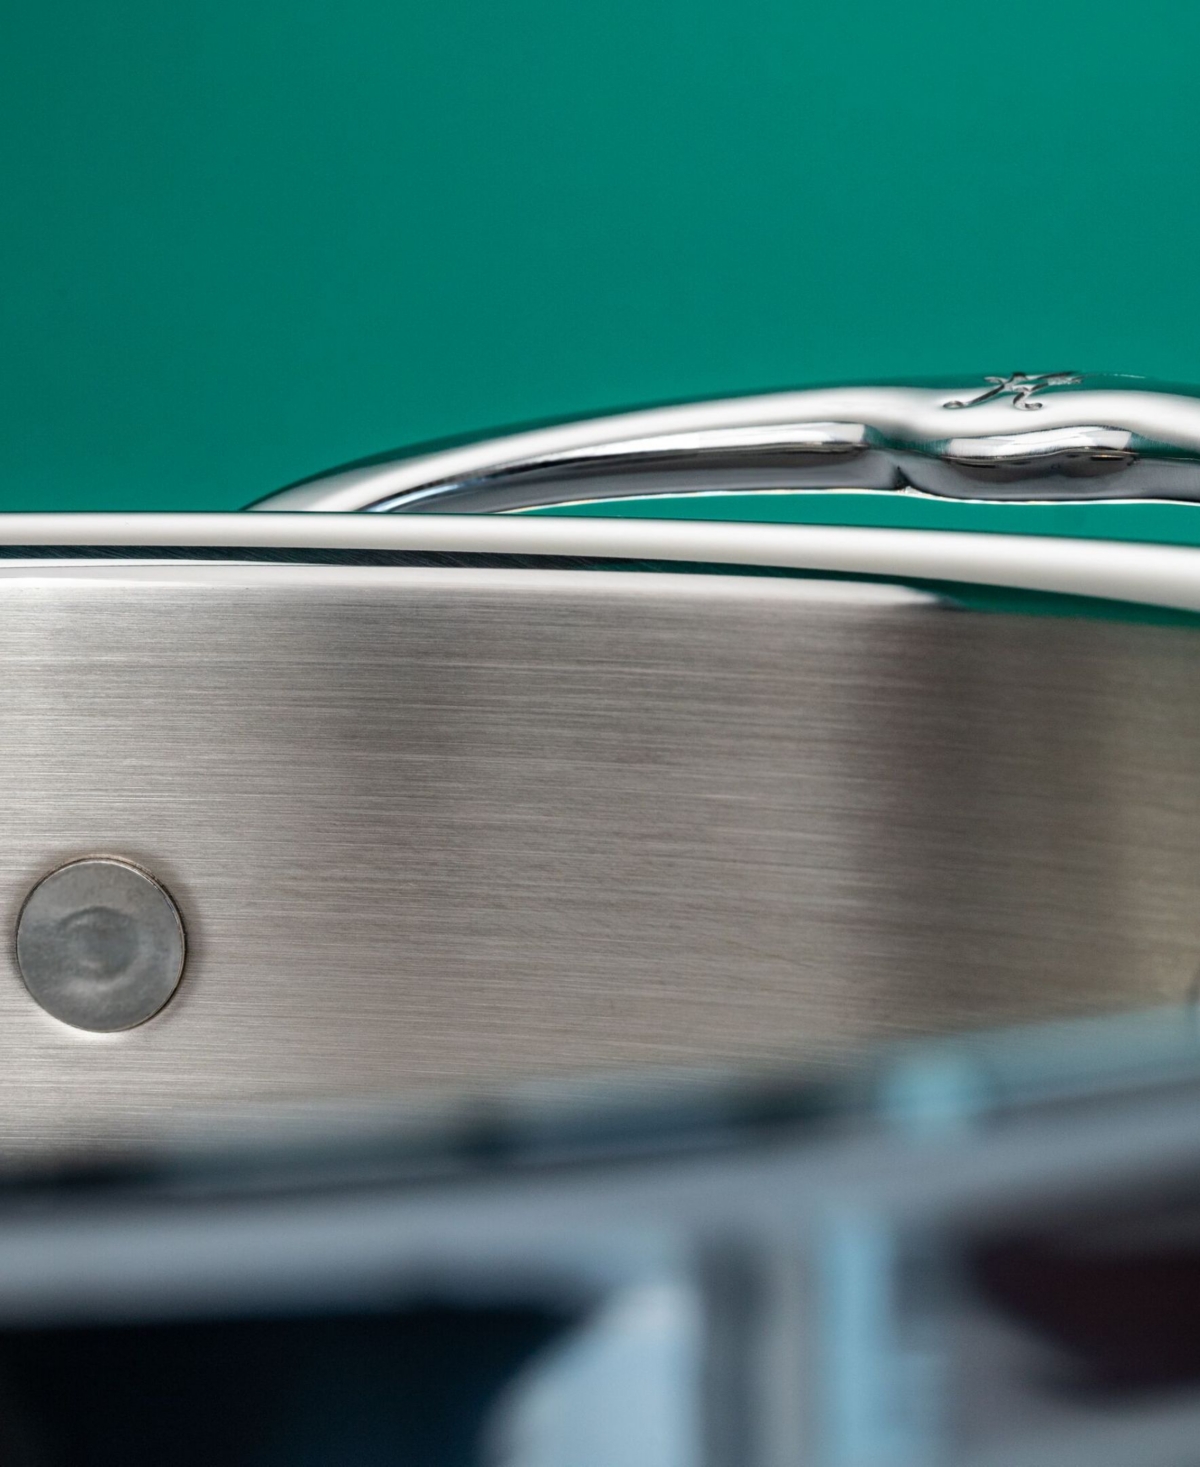 Shop Hestan Probond Clad Stainless Steel 4-quart Covered Saucepan With Helper Handle In Silver